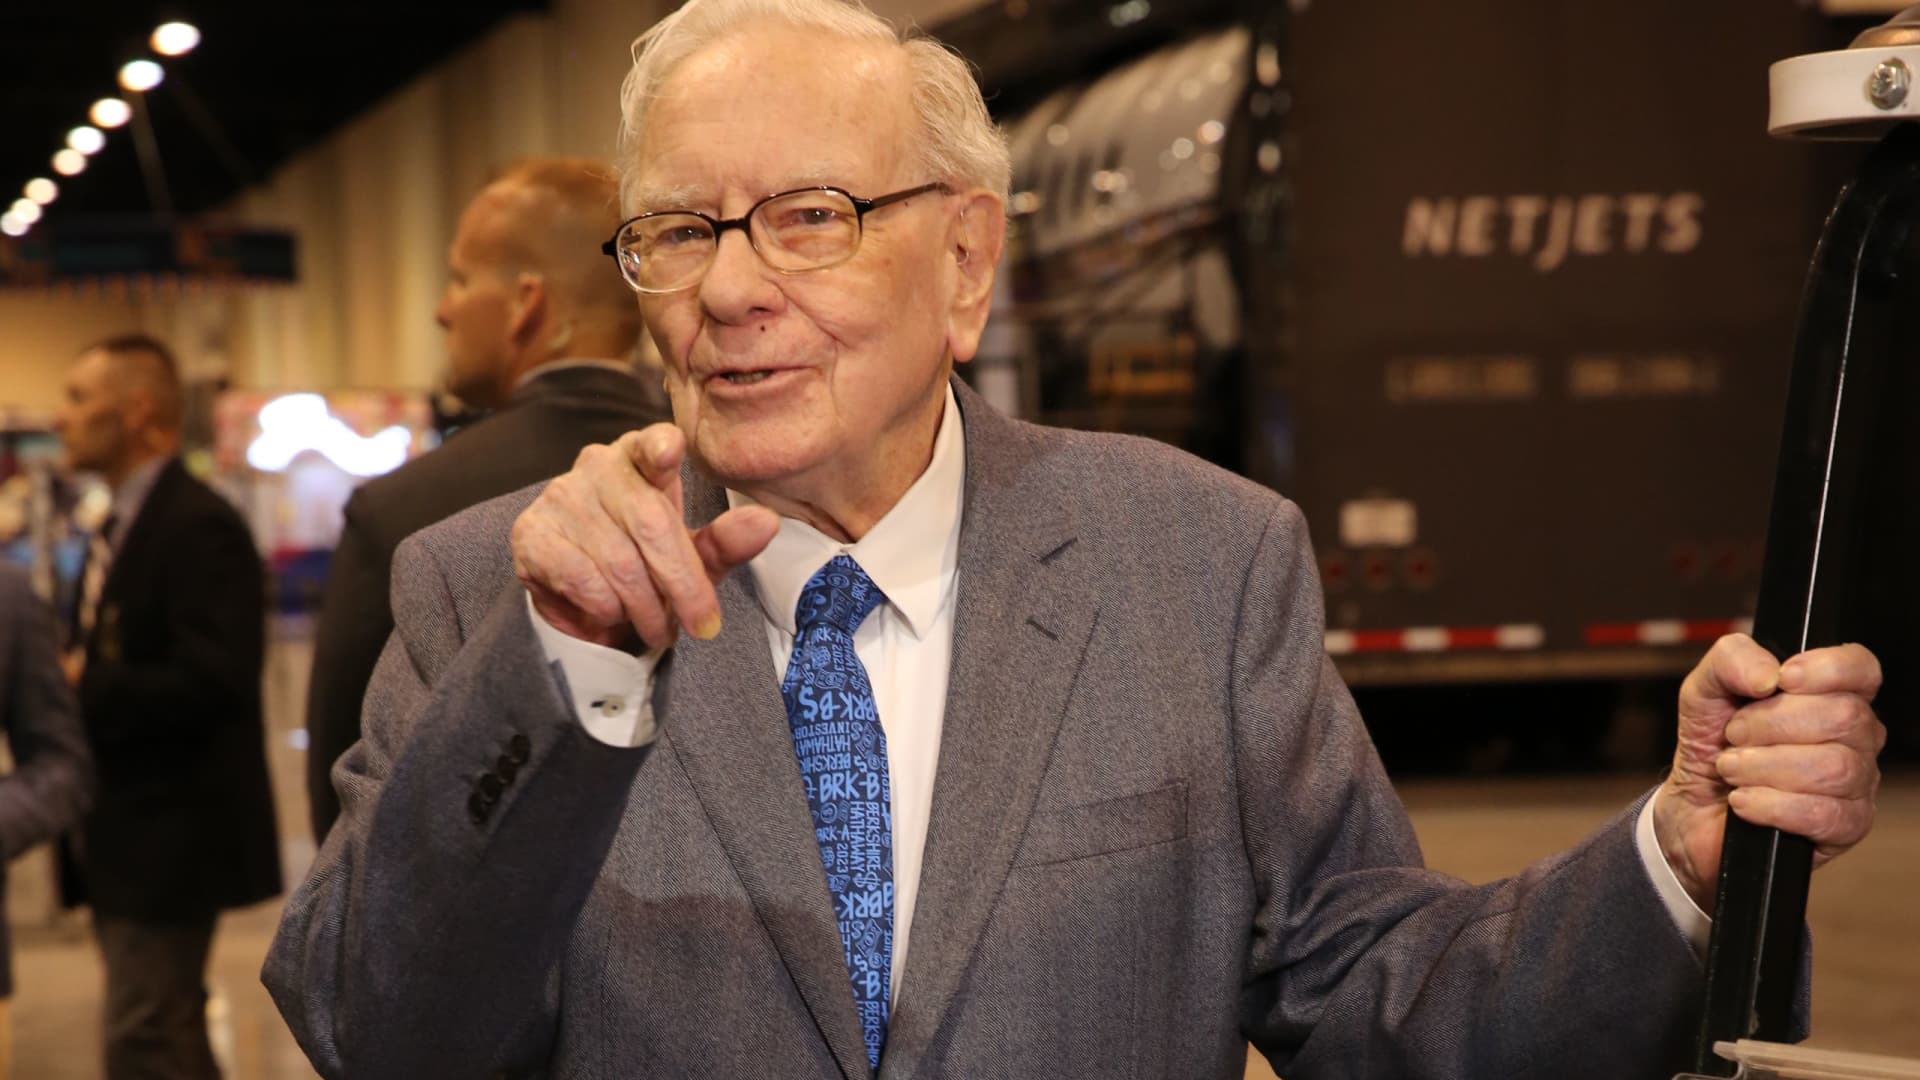 Want to invest like Warren Buffett? Ignore pundits and 'never risk